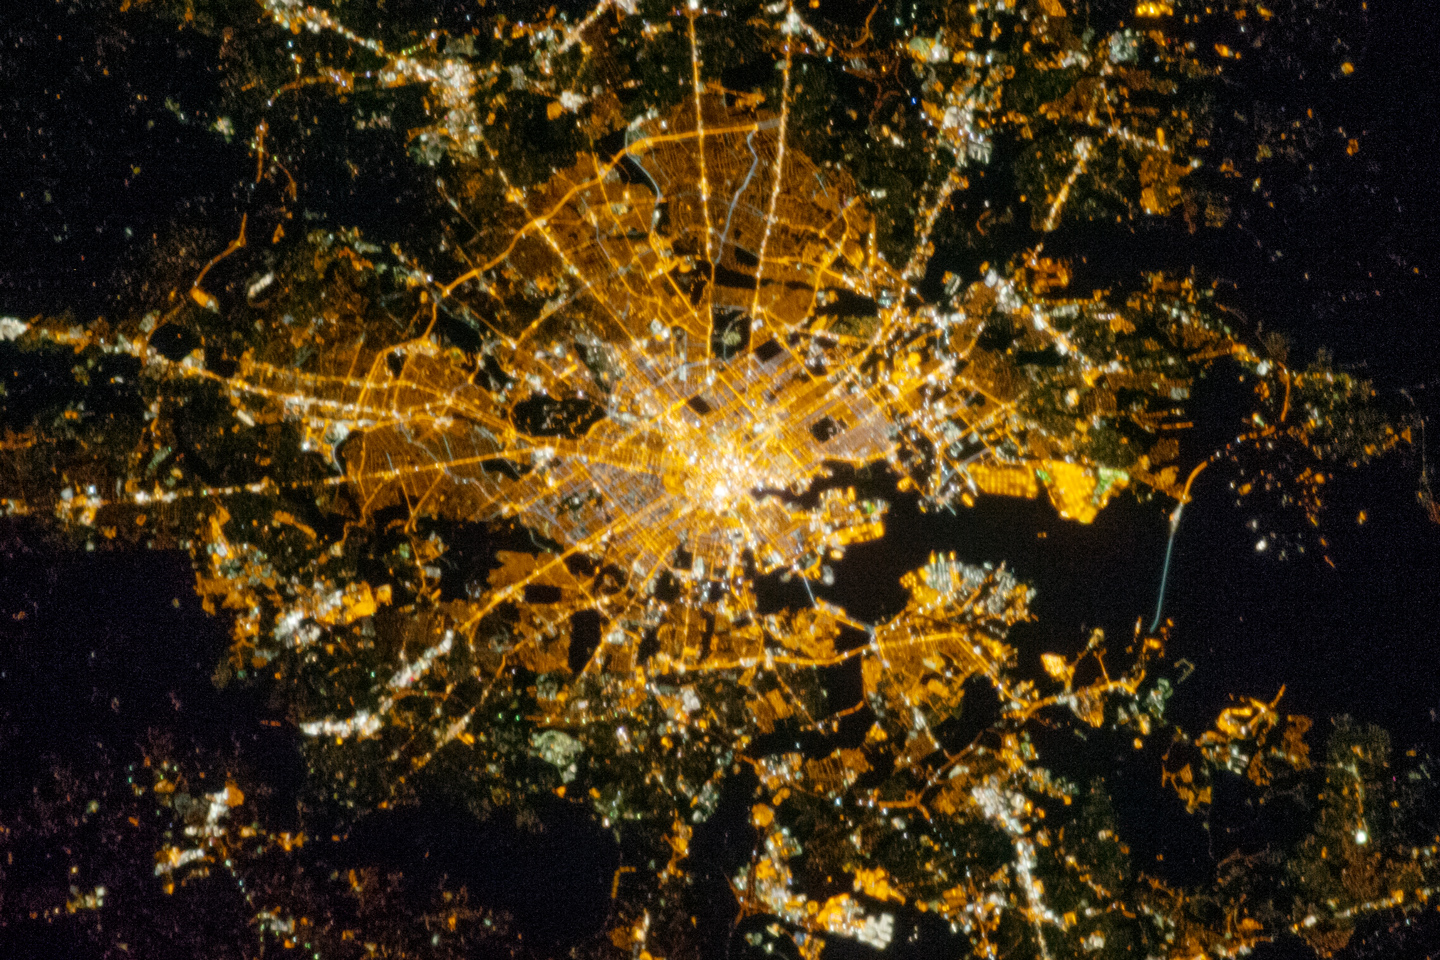 Baltimore at Night - related image preview